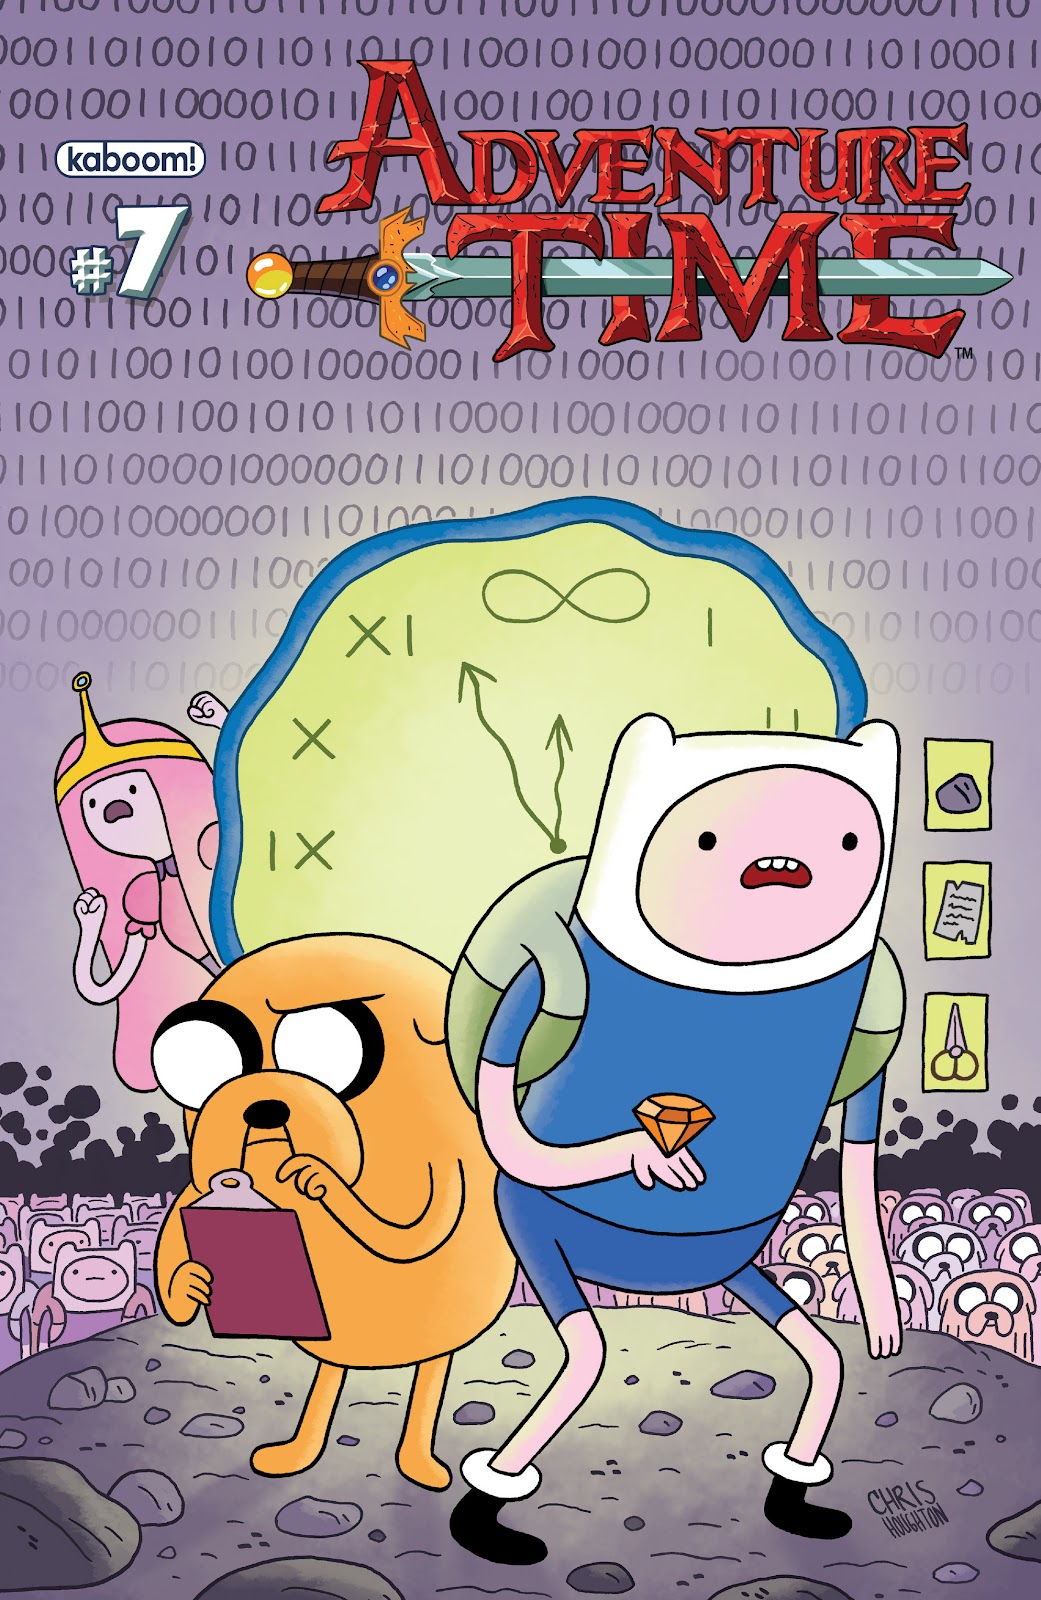 Adventure Time issue 7 - Page 1